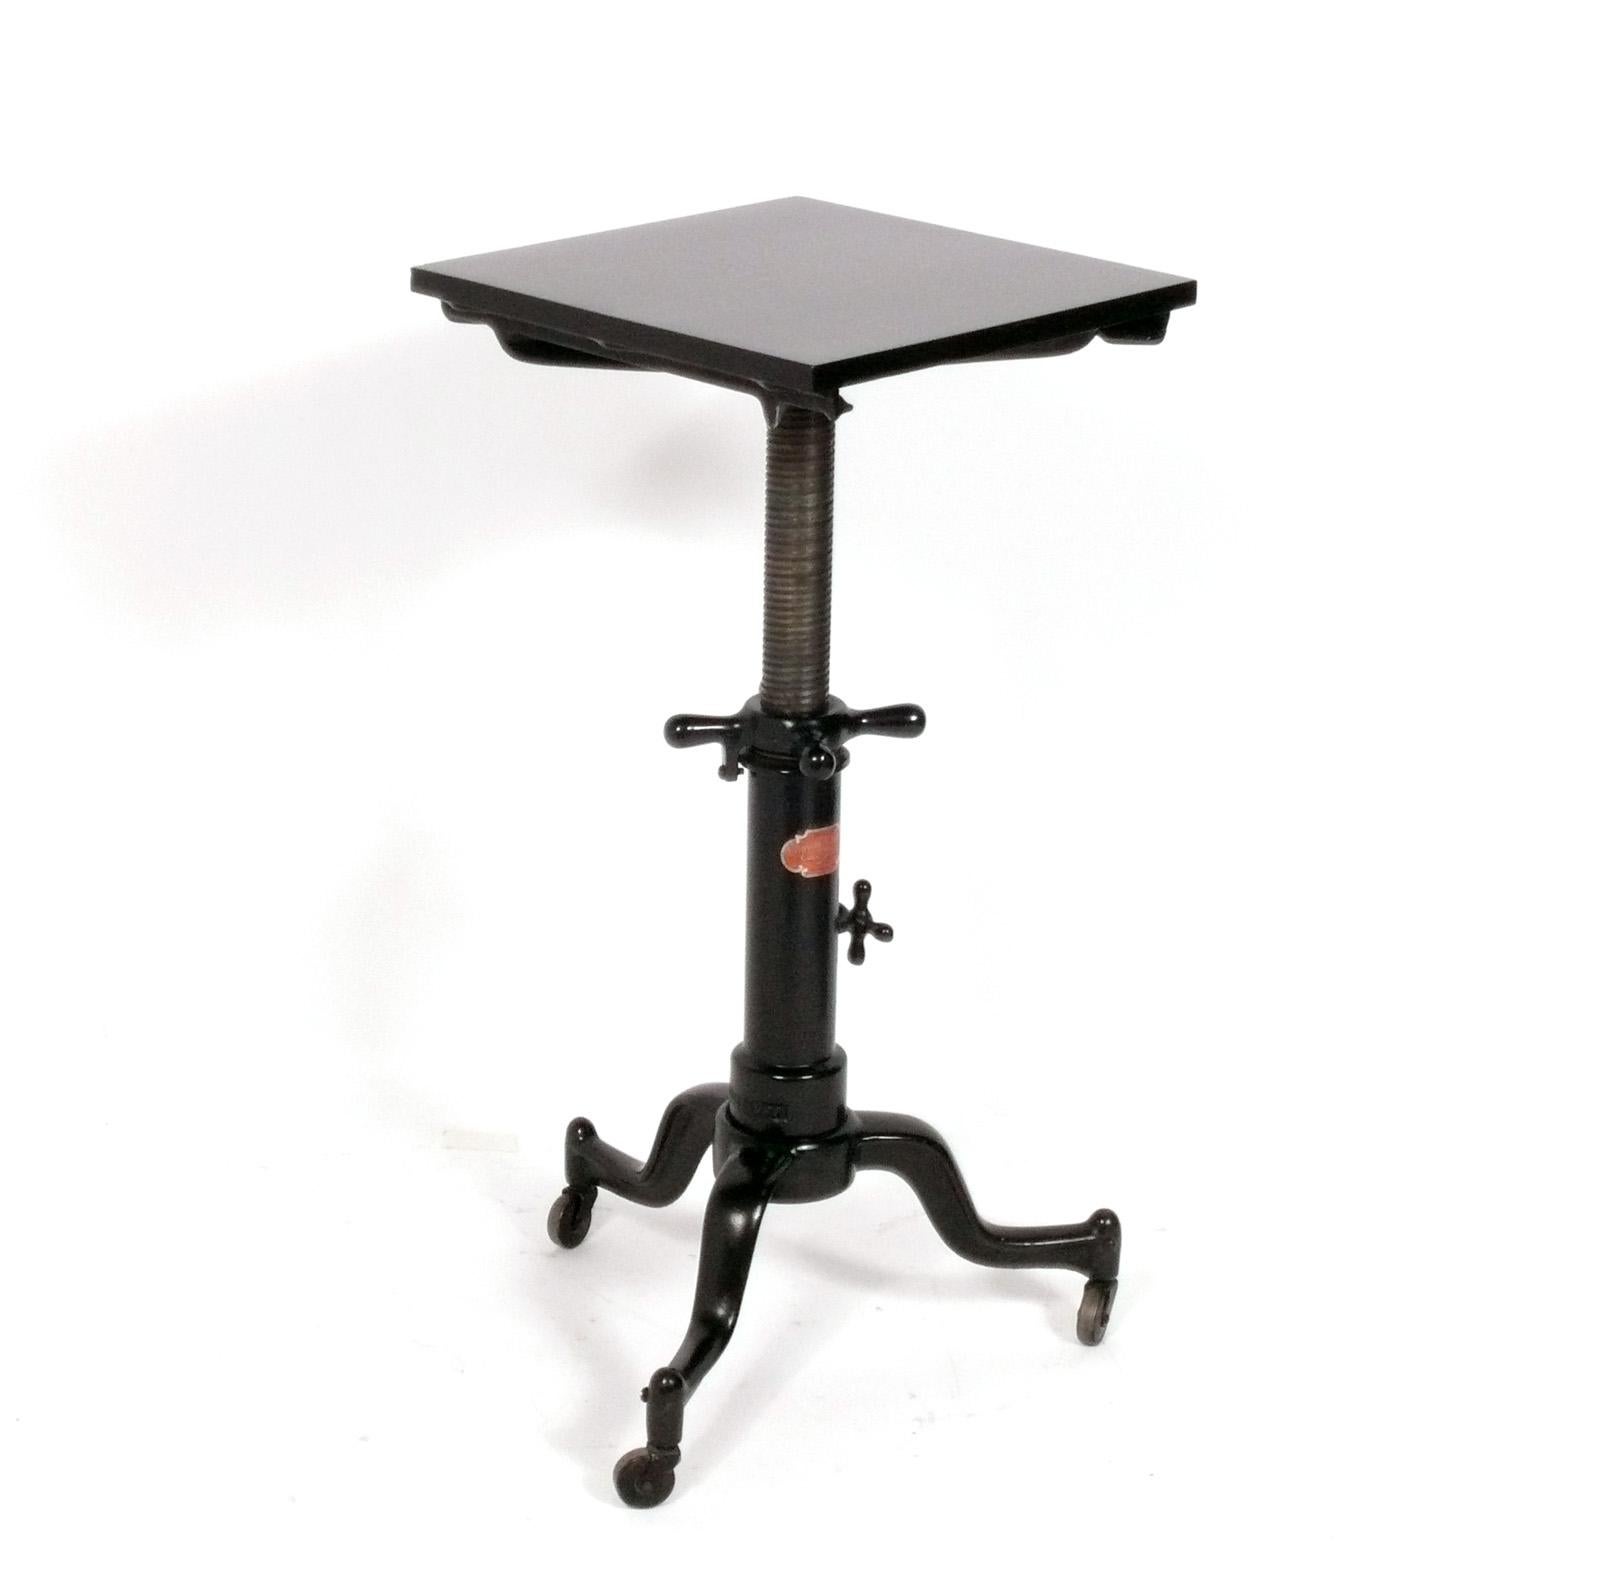 Industrial sculpture stand, American, circa 1930s. This piece was originally probably used as a typewriter stand, but would work well as a sculpture stand, nightstand, or pedestal. It is called the satellite table, and was made by the Adjustable